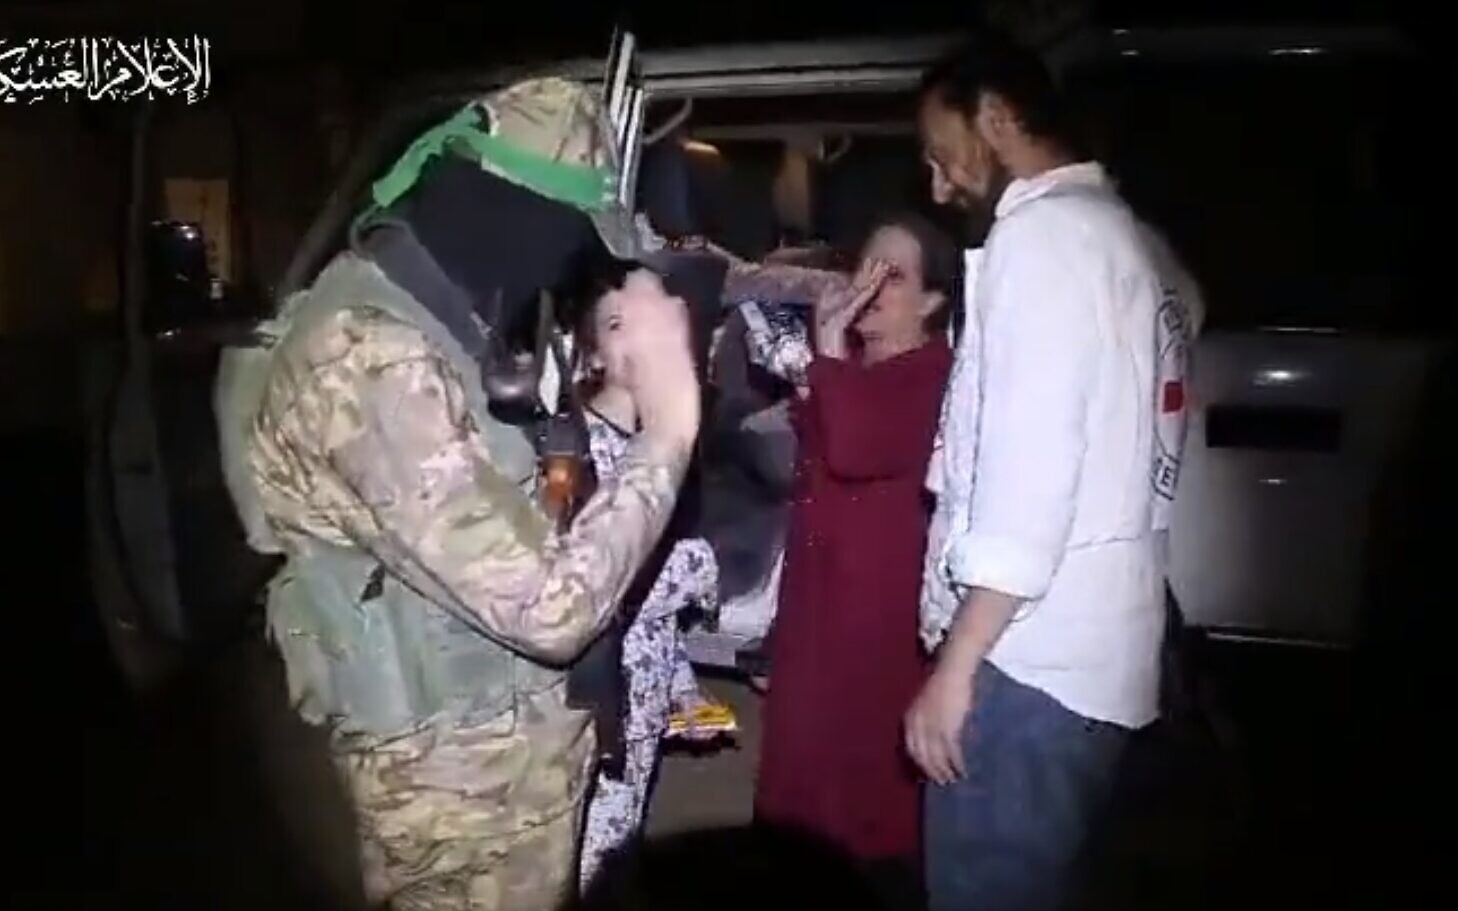 Keep waving': Daily Hamas propaganda clips show freed hostages' forced  goodbyes | The Times of Israel